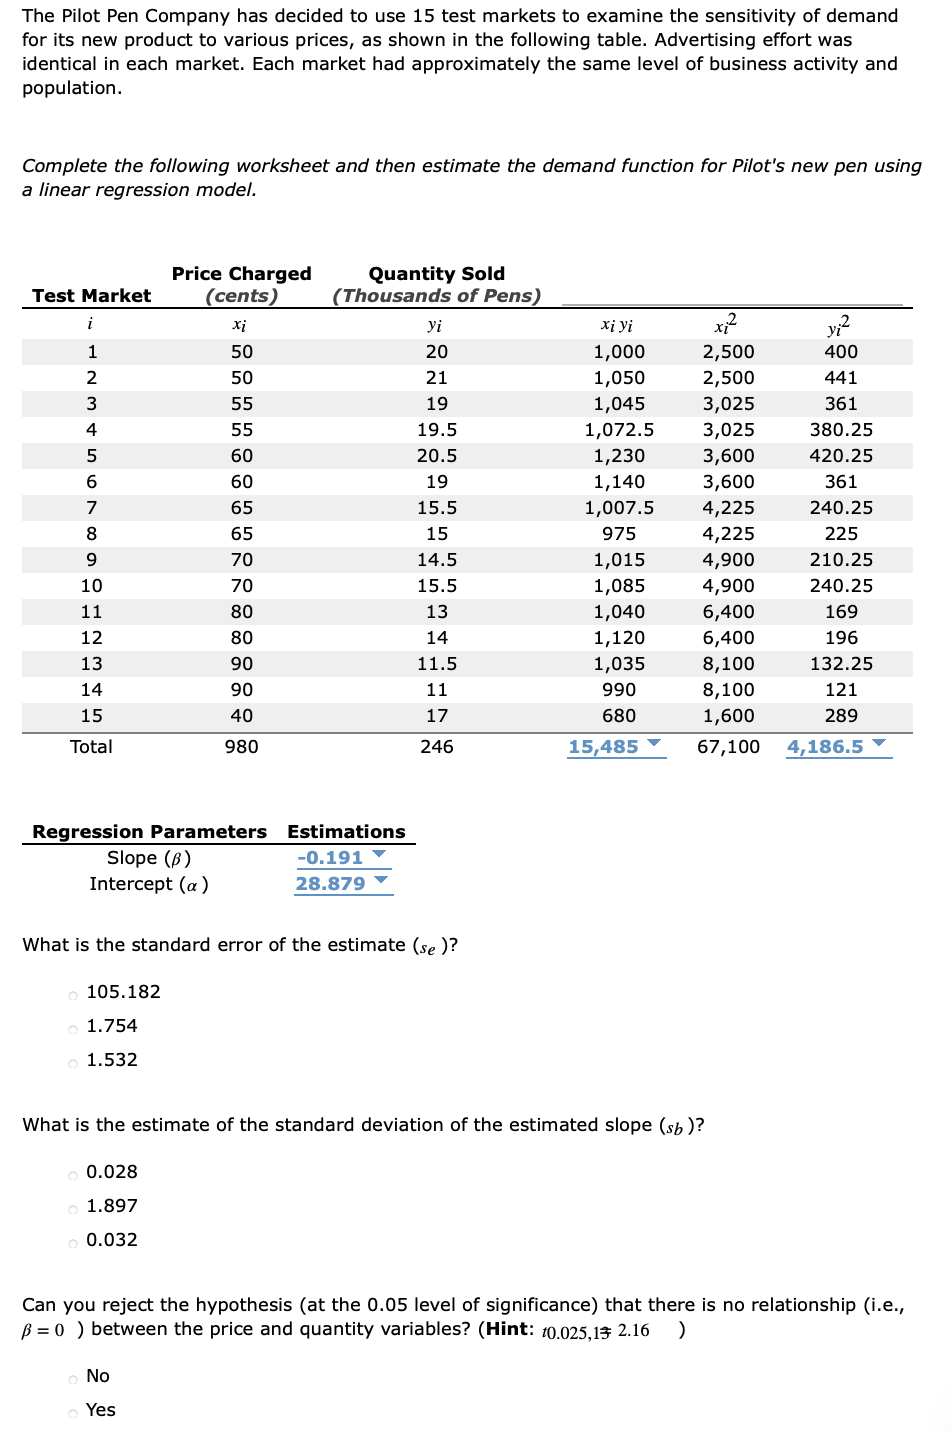 The Pilot Pen Company has decided to use 15 test markets to examine the sensitivity of demand
for its new product to various prices, as shown in the following table. Advertising effort was
identical in each market. Each market had approximately the same level of business activity and
population.
Complete the following worksheet and then estimate the demand function for Pilot's new pen using
a linear regression model.
Price Charged
Quantity Sold
(Thousands of Pens)
Test Market
(cents)
xị
yi
Xi yi
yi?
1
50
20
1,000
2,500
400
2
50
21
1,050
2,500
441
55
19
1,045
3,025
361
4
55
19.5
1,072.5
3,025
380.25
60
20.5
1,230
3,600
420.25
6.
60
19
1,140
3,600
361
7
65
15.5
1,007.5
4,225
240.25
8
65
15
975
4,225
225
9.
70
14.5
1,015
4,900
210.25
10
70
15.5
1,085
4,900
240.25
11
80
13
1,040
6,400
169
12
80
14
1,120
6,400
196
13
90
11.5
1,035
8,100
132.25
14
90
11
990
8,100
121
15
40
17
680
1,600
289
Total
980
246
15,485
67,100
4,186.5 ▼
Regression Parameters Estimations
Slope (B)
Intercept (a)
-0.191 ▼
28.879
What is the standard error of the estimate (se )?
105.182
1.754
1.532
What is the estimate of the standard deviation of the estimated slope (sh )?
0.028
1.897
0.032
Can you reject the hypothesis (at the 0.05 level of significance) that there is no relationship (i.e.,
B = 0 ) between the price and quantity variables? (Hint: 10.025,13 2.16
No
Yes
